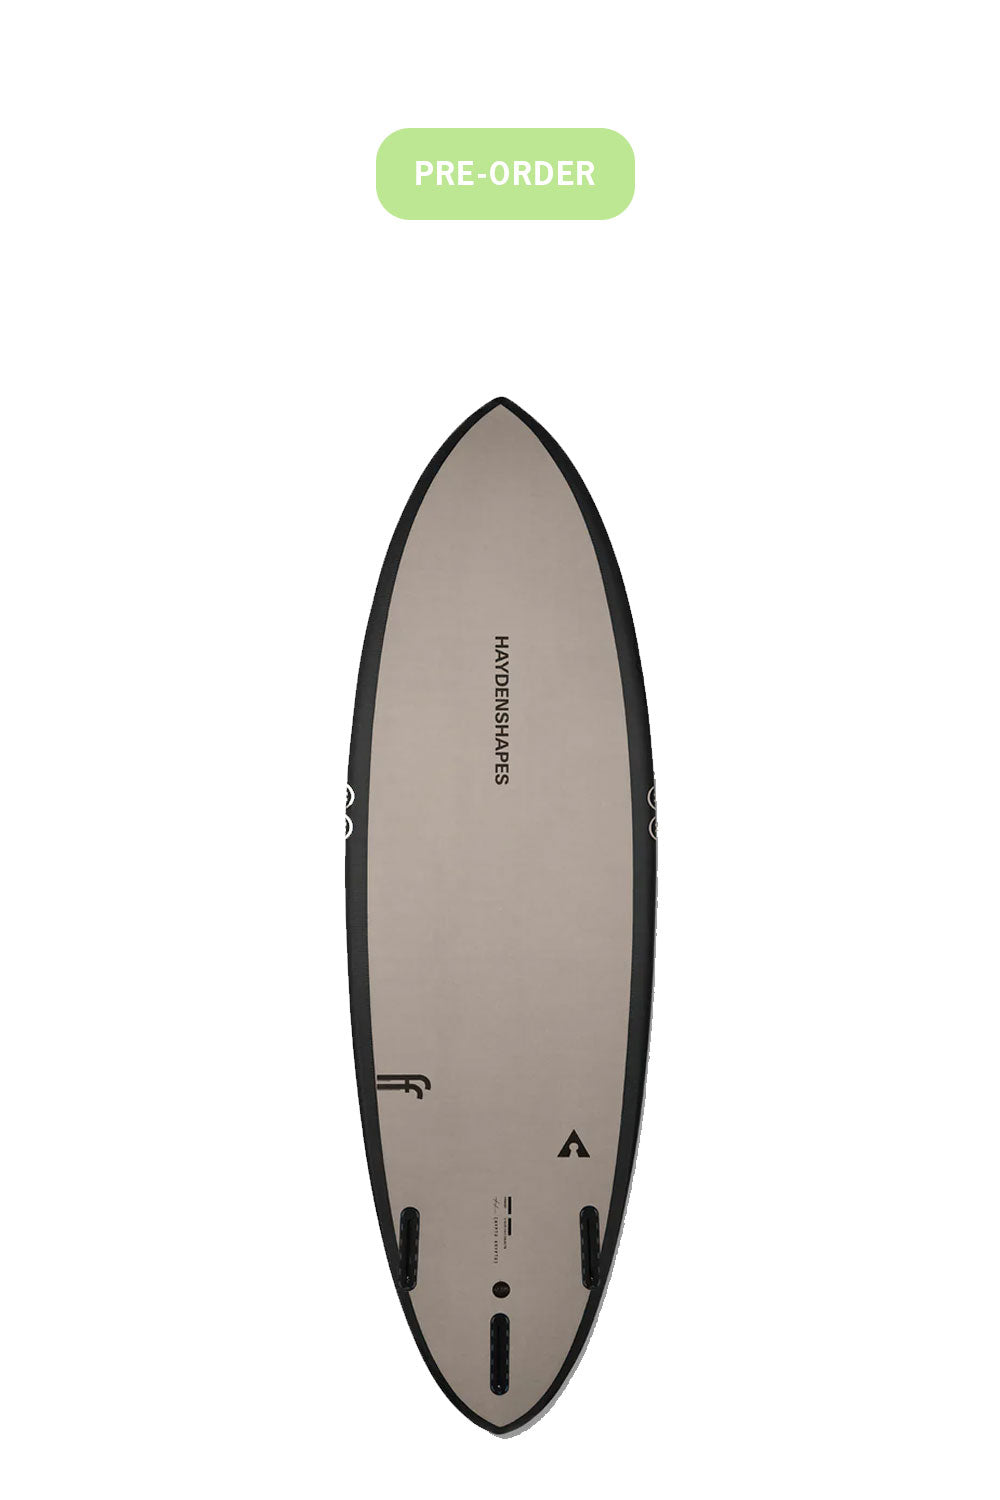 ALL TYPES OF SURFBOARDS | Available at PUKAS SURF SHOP